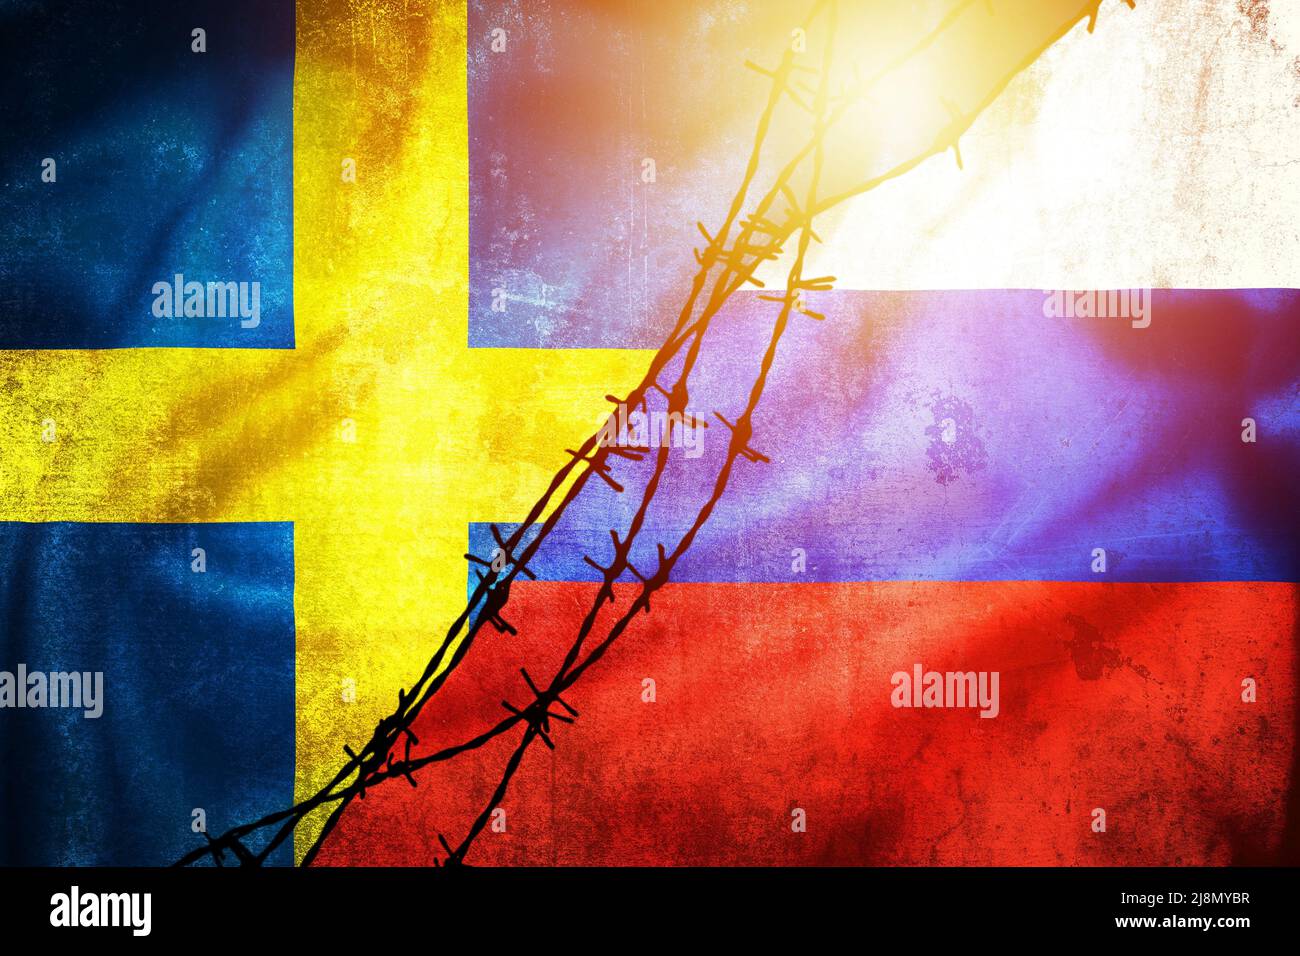 Grunge flags of Russian Federation and Sweden divided by barb wire sun haze illustration, concept of tense relations between west and Russia Stock Photo